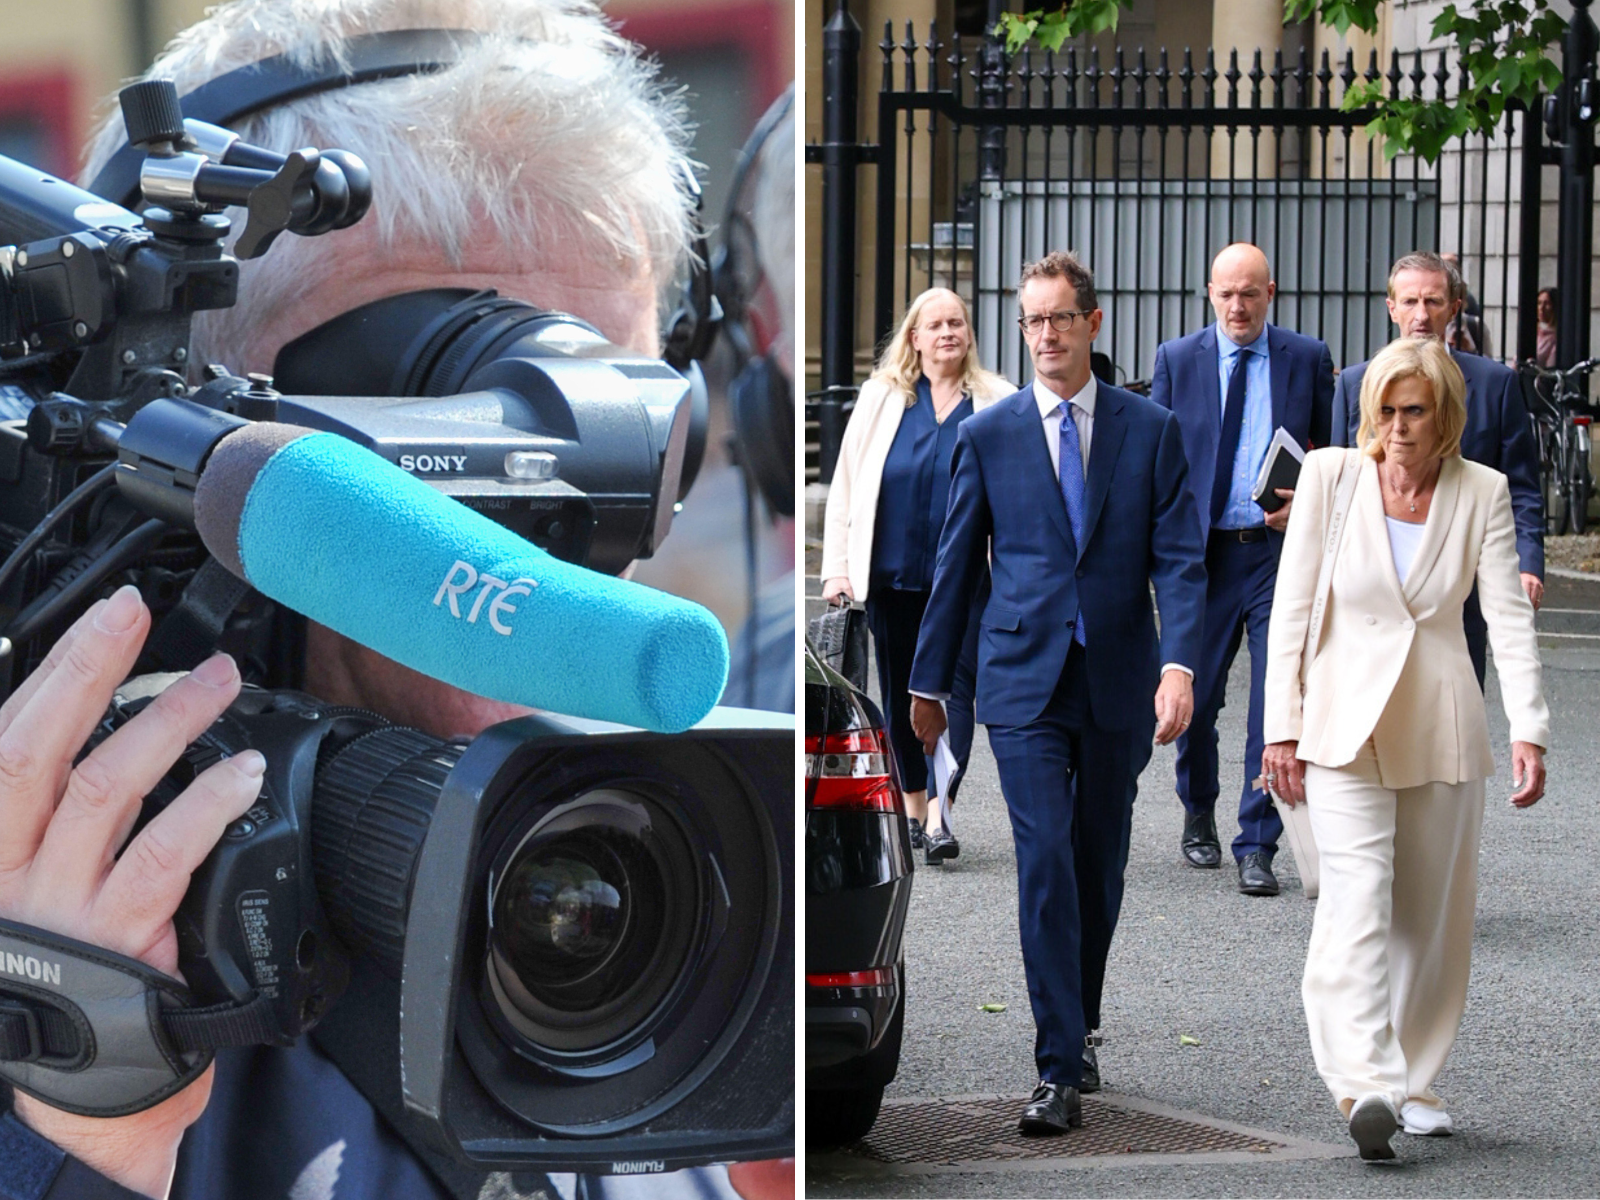 A split-screen of an RTÉ cameraman and RTÉ executives arriving at Leinster House.